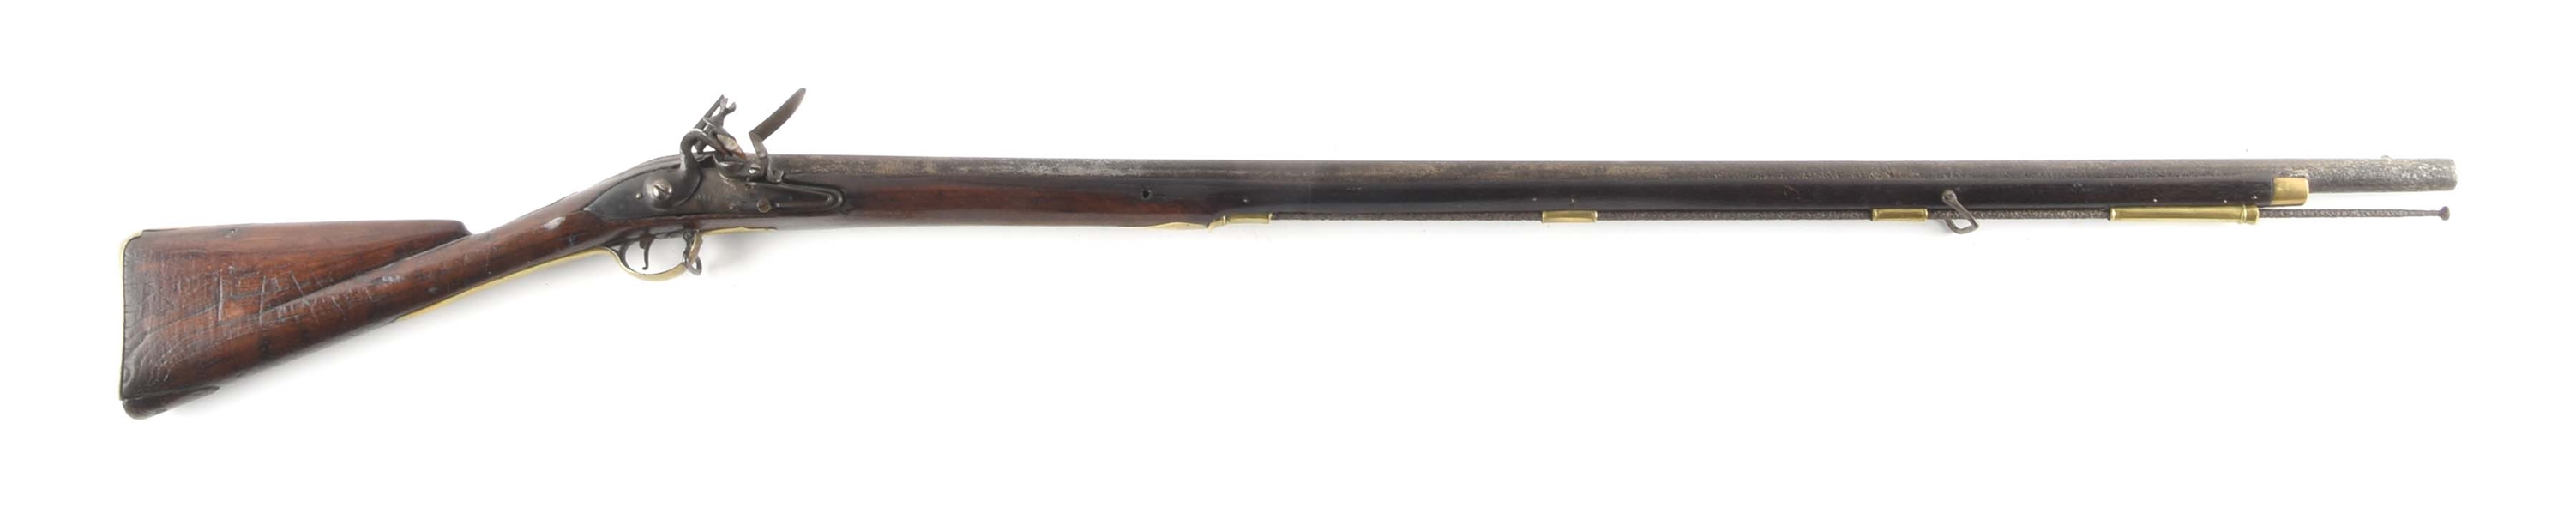 (A) NEW JERSEY MARKED FLINTLOCK CONTRACT MUSKET BY RICHARD WILSON.